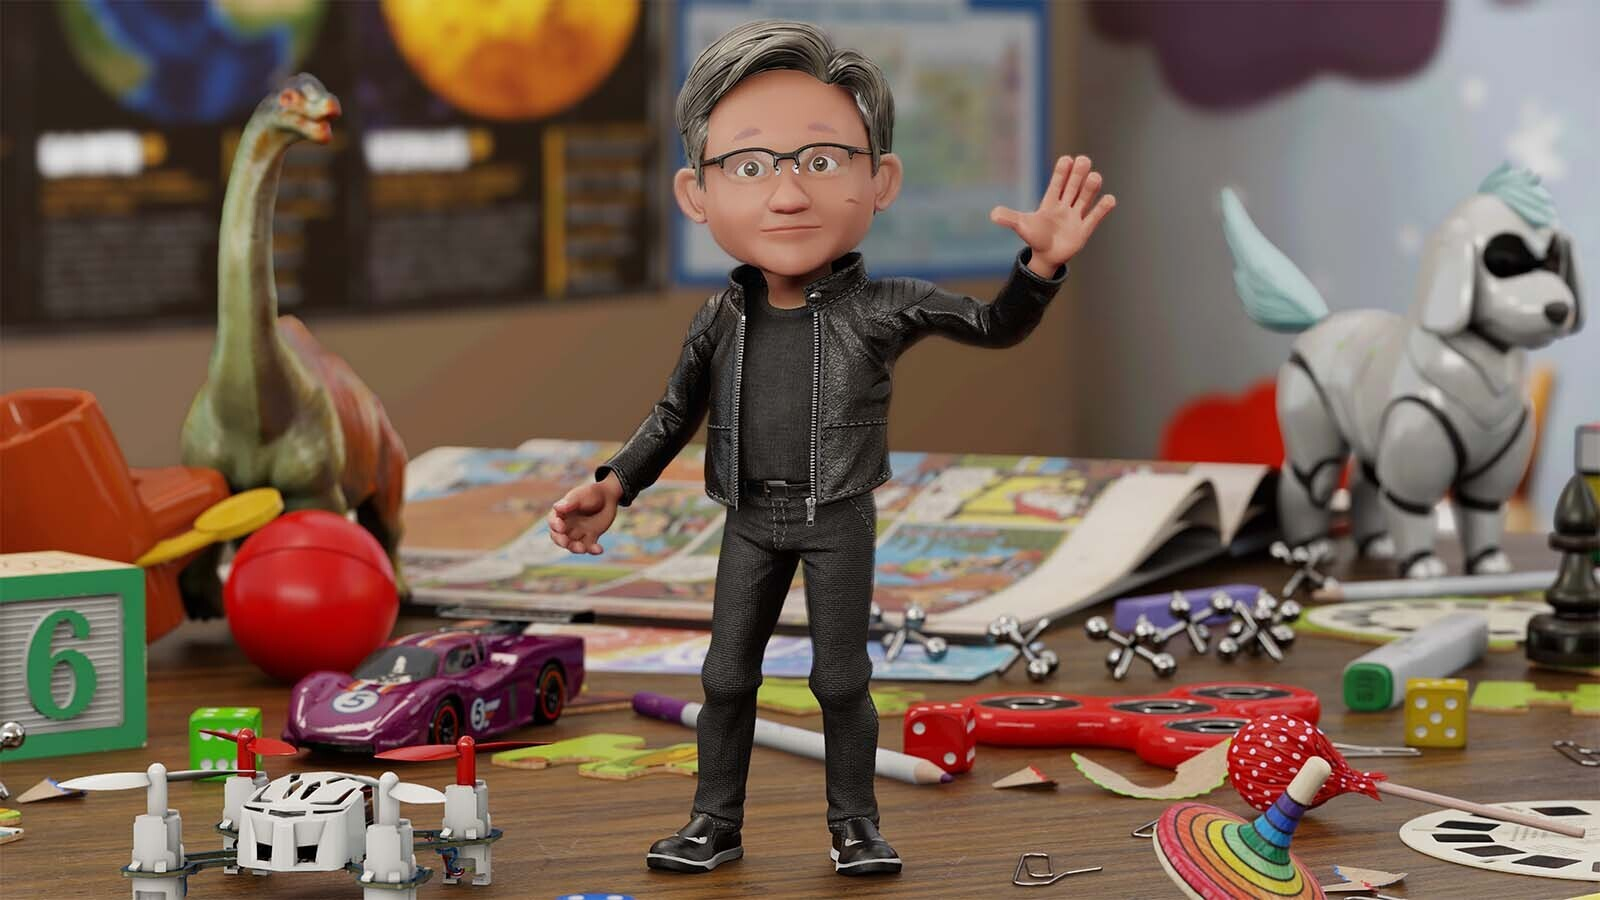 A computer-generated 'toy' model of Nvidia CEO Jensen Huang, standing on a desk surrounded by other toys.